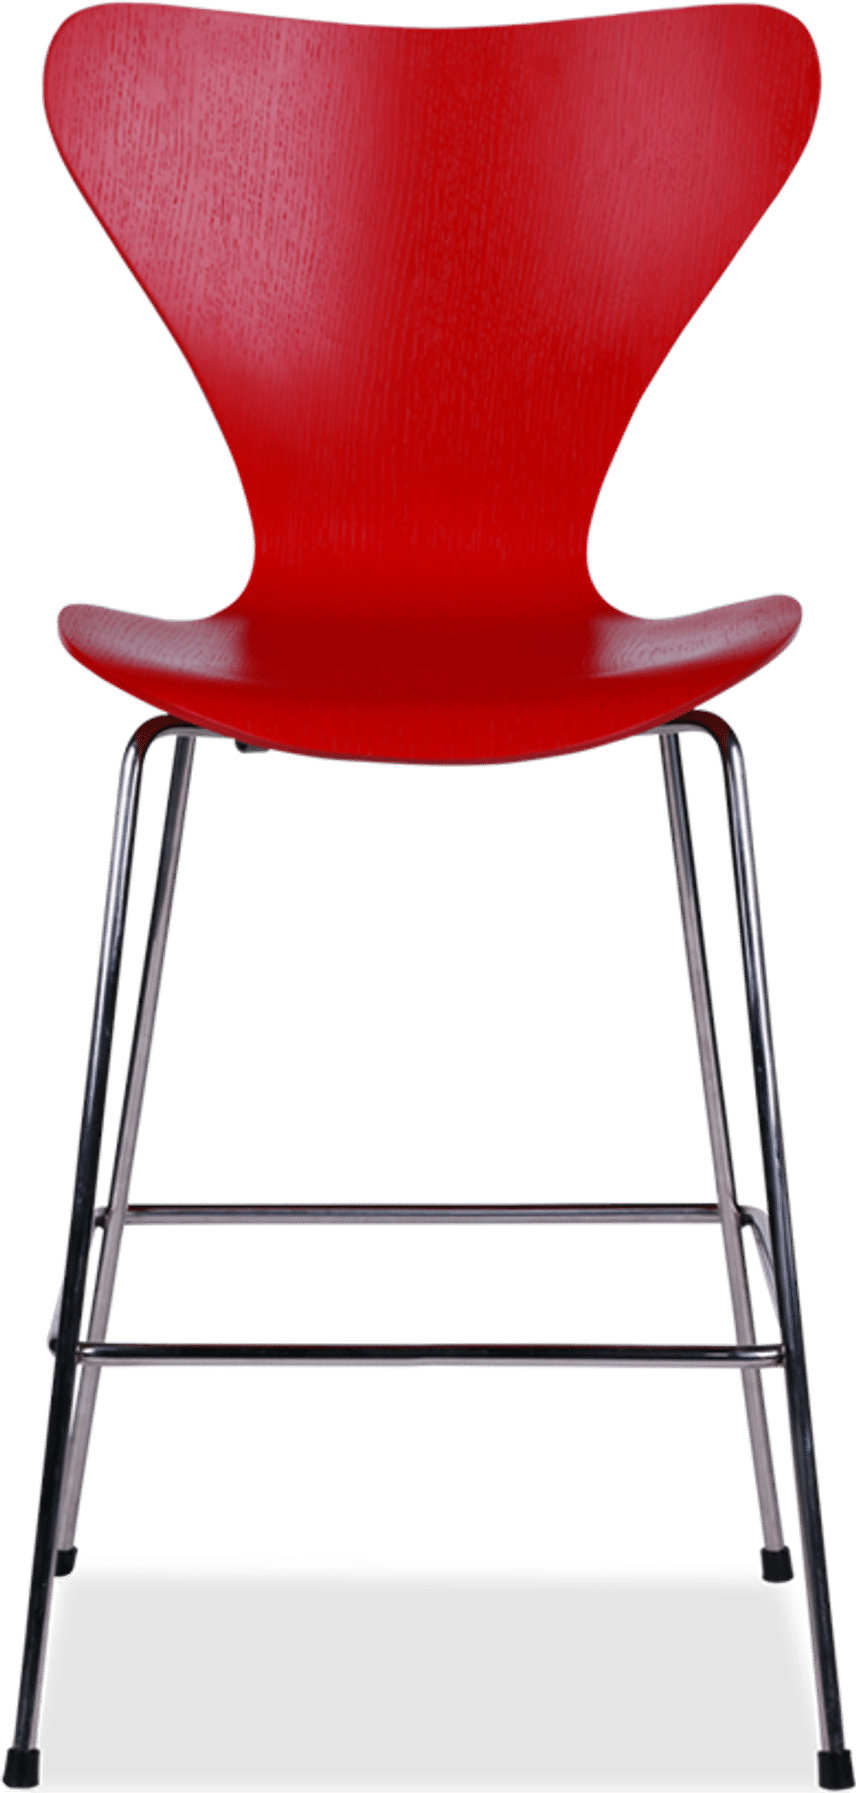 Series 7 Counter Stool Plywood/Red image.